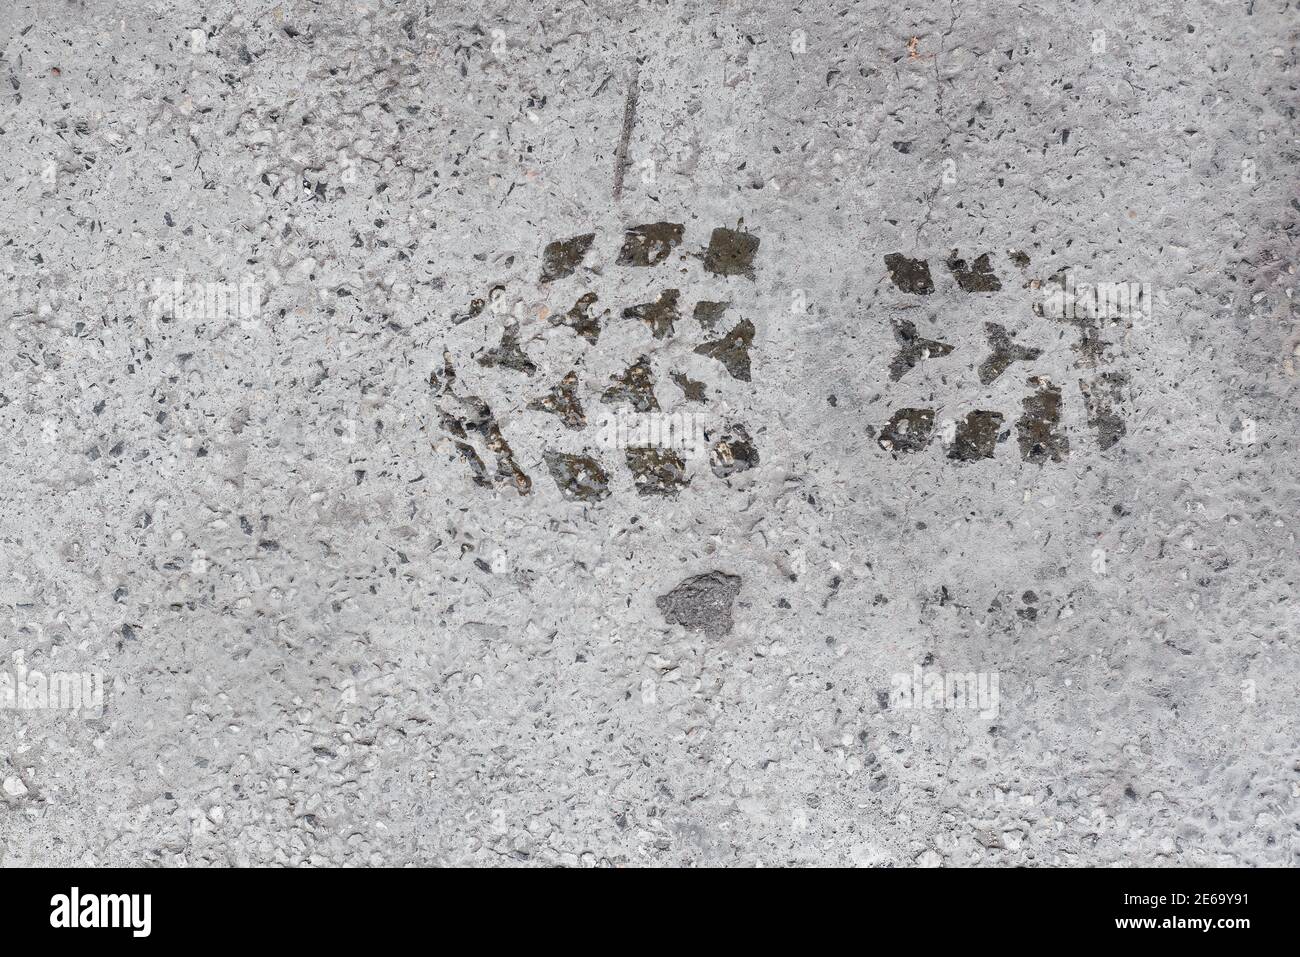 Wet shoe print on concrete cement white smooth surface with small pebbles aged urban texture Stock Photo